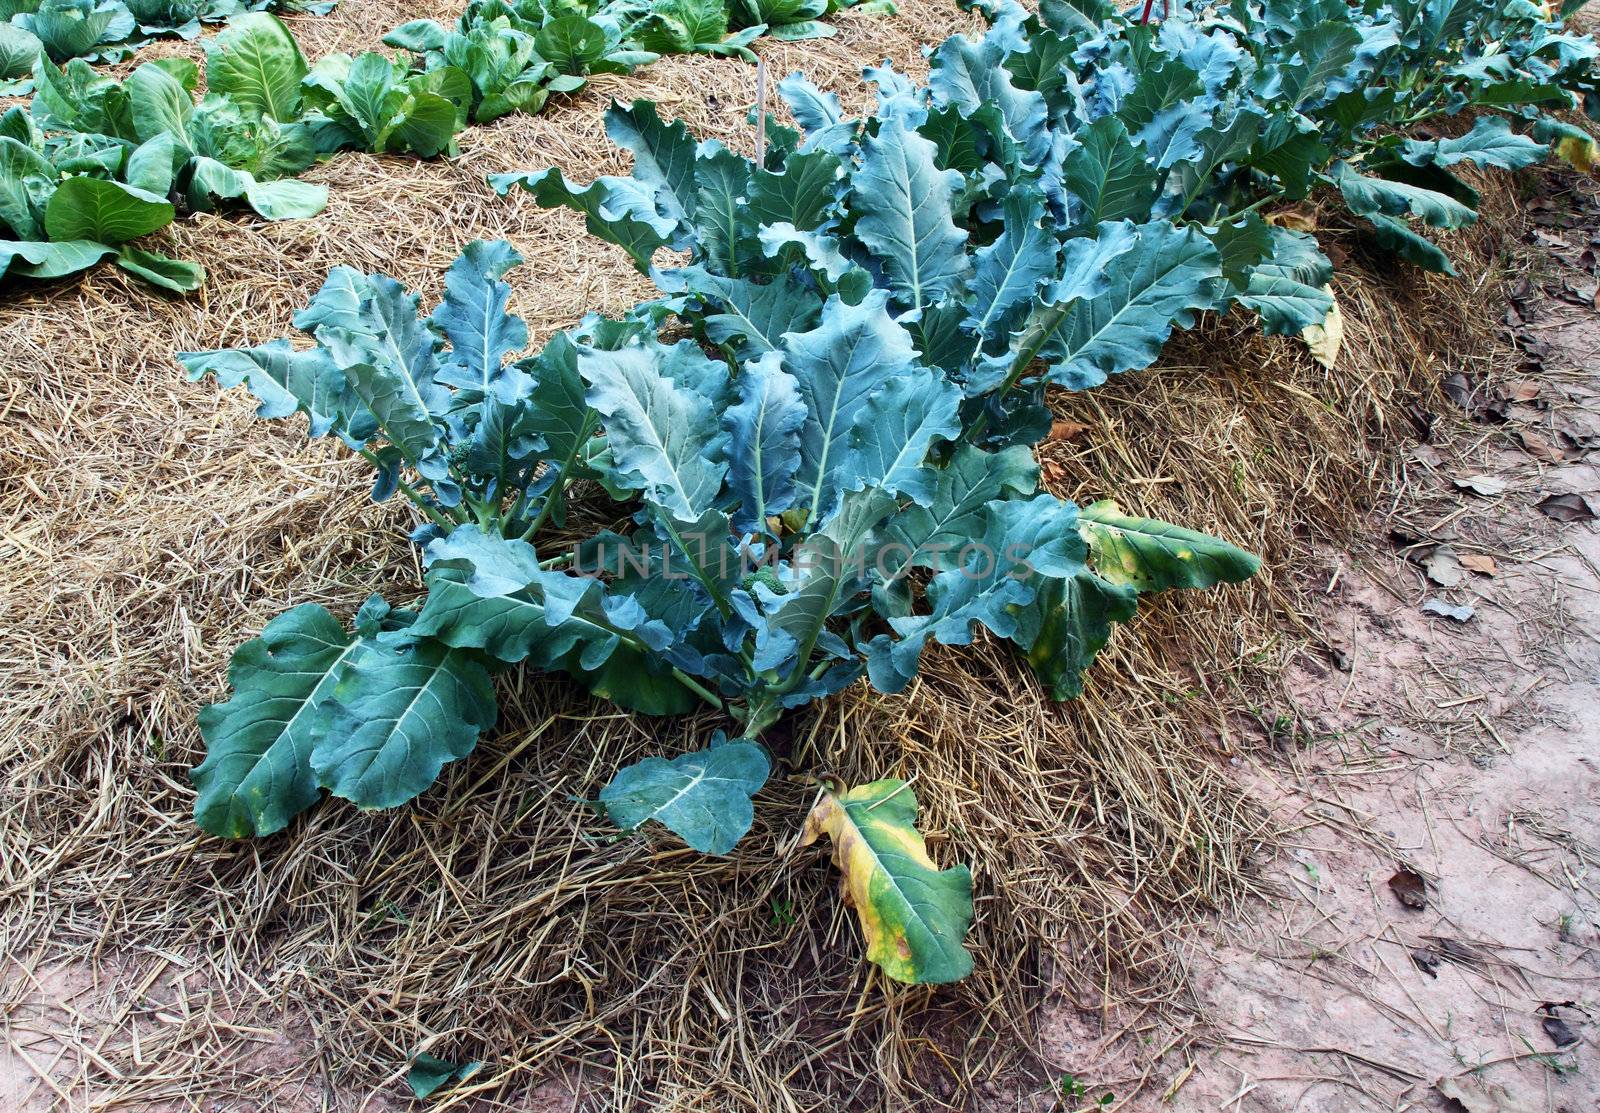 Chinese kale vegetable at a farm